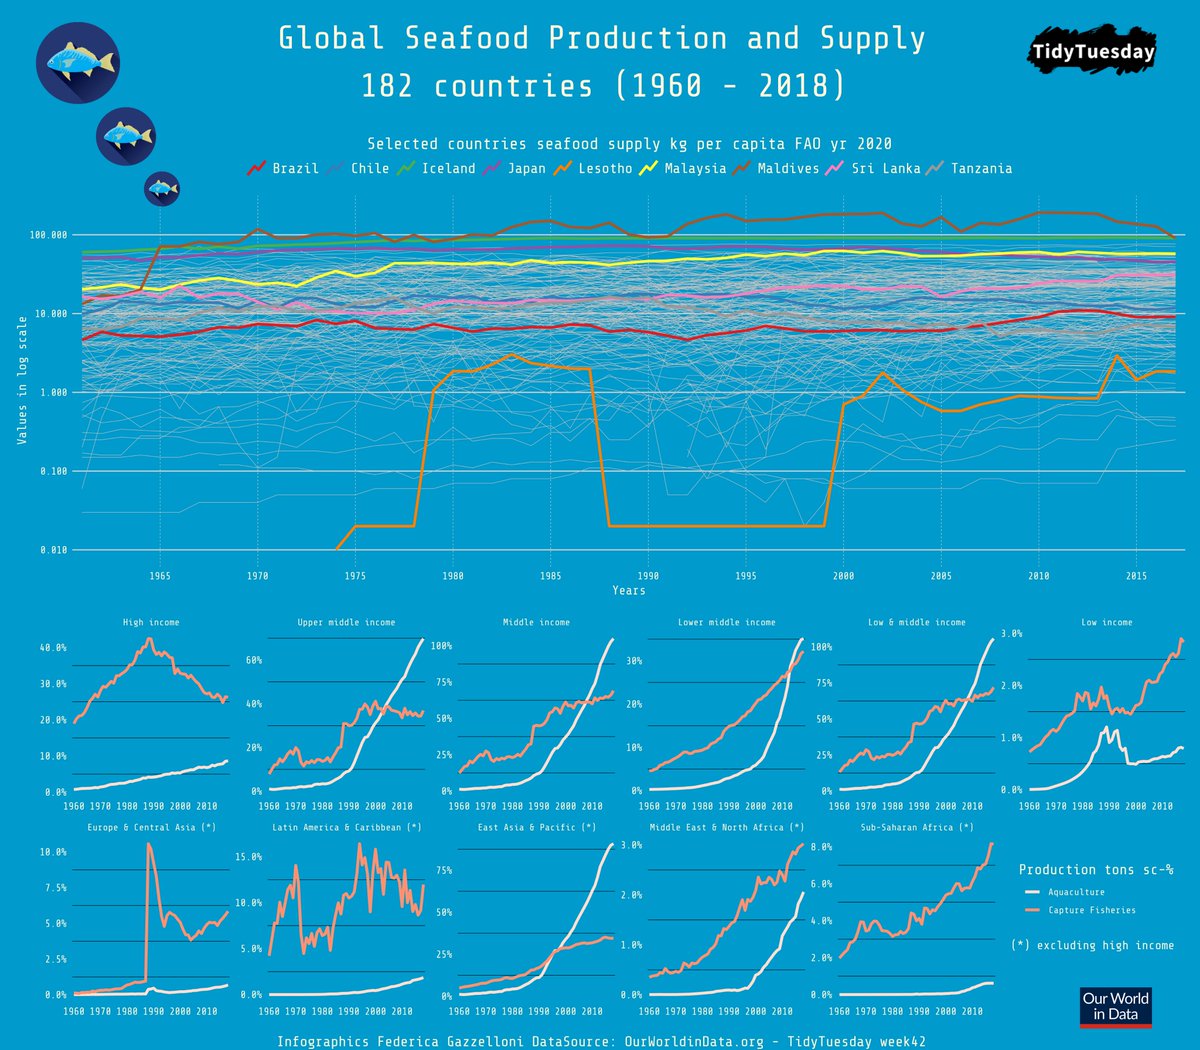 Global SeaFood exploratory data analysis of #production and #supply for selected countries and continents vs income levels 1960-2018 
Week42 #TidyTuesday
#reproducible #research @R4DScommunity #RStats #dataviz @OurWorldInData @FAO #infographic #timeseries #EDA #DataScience
Code👇